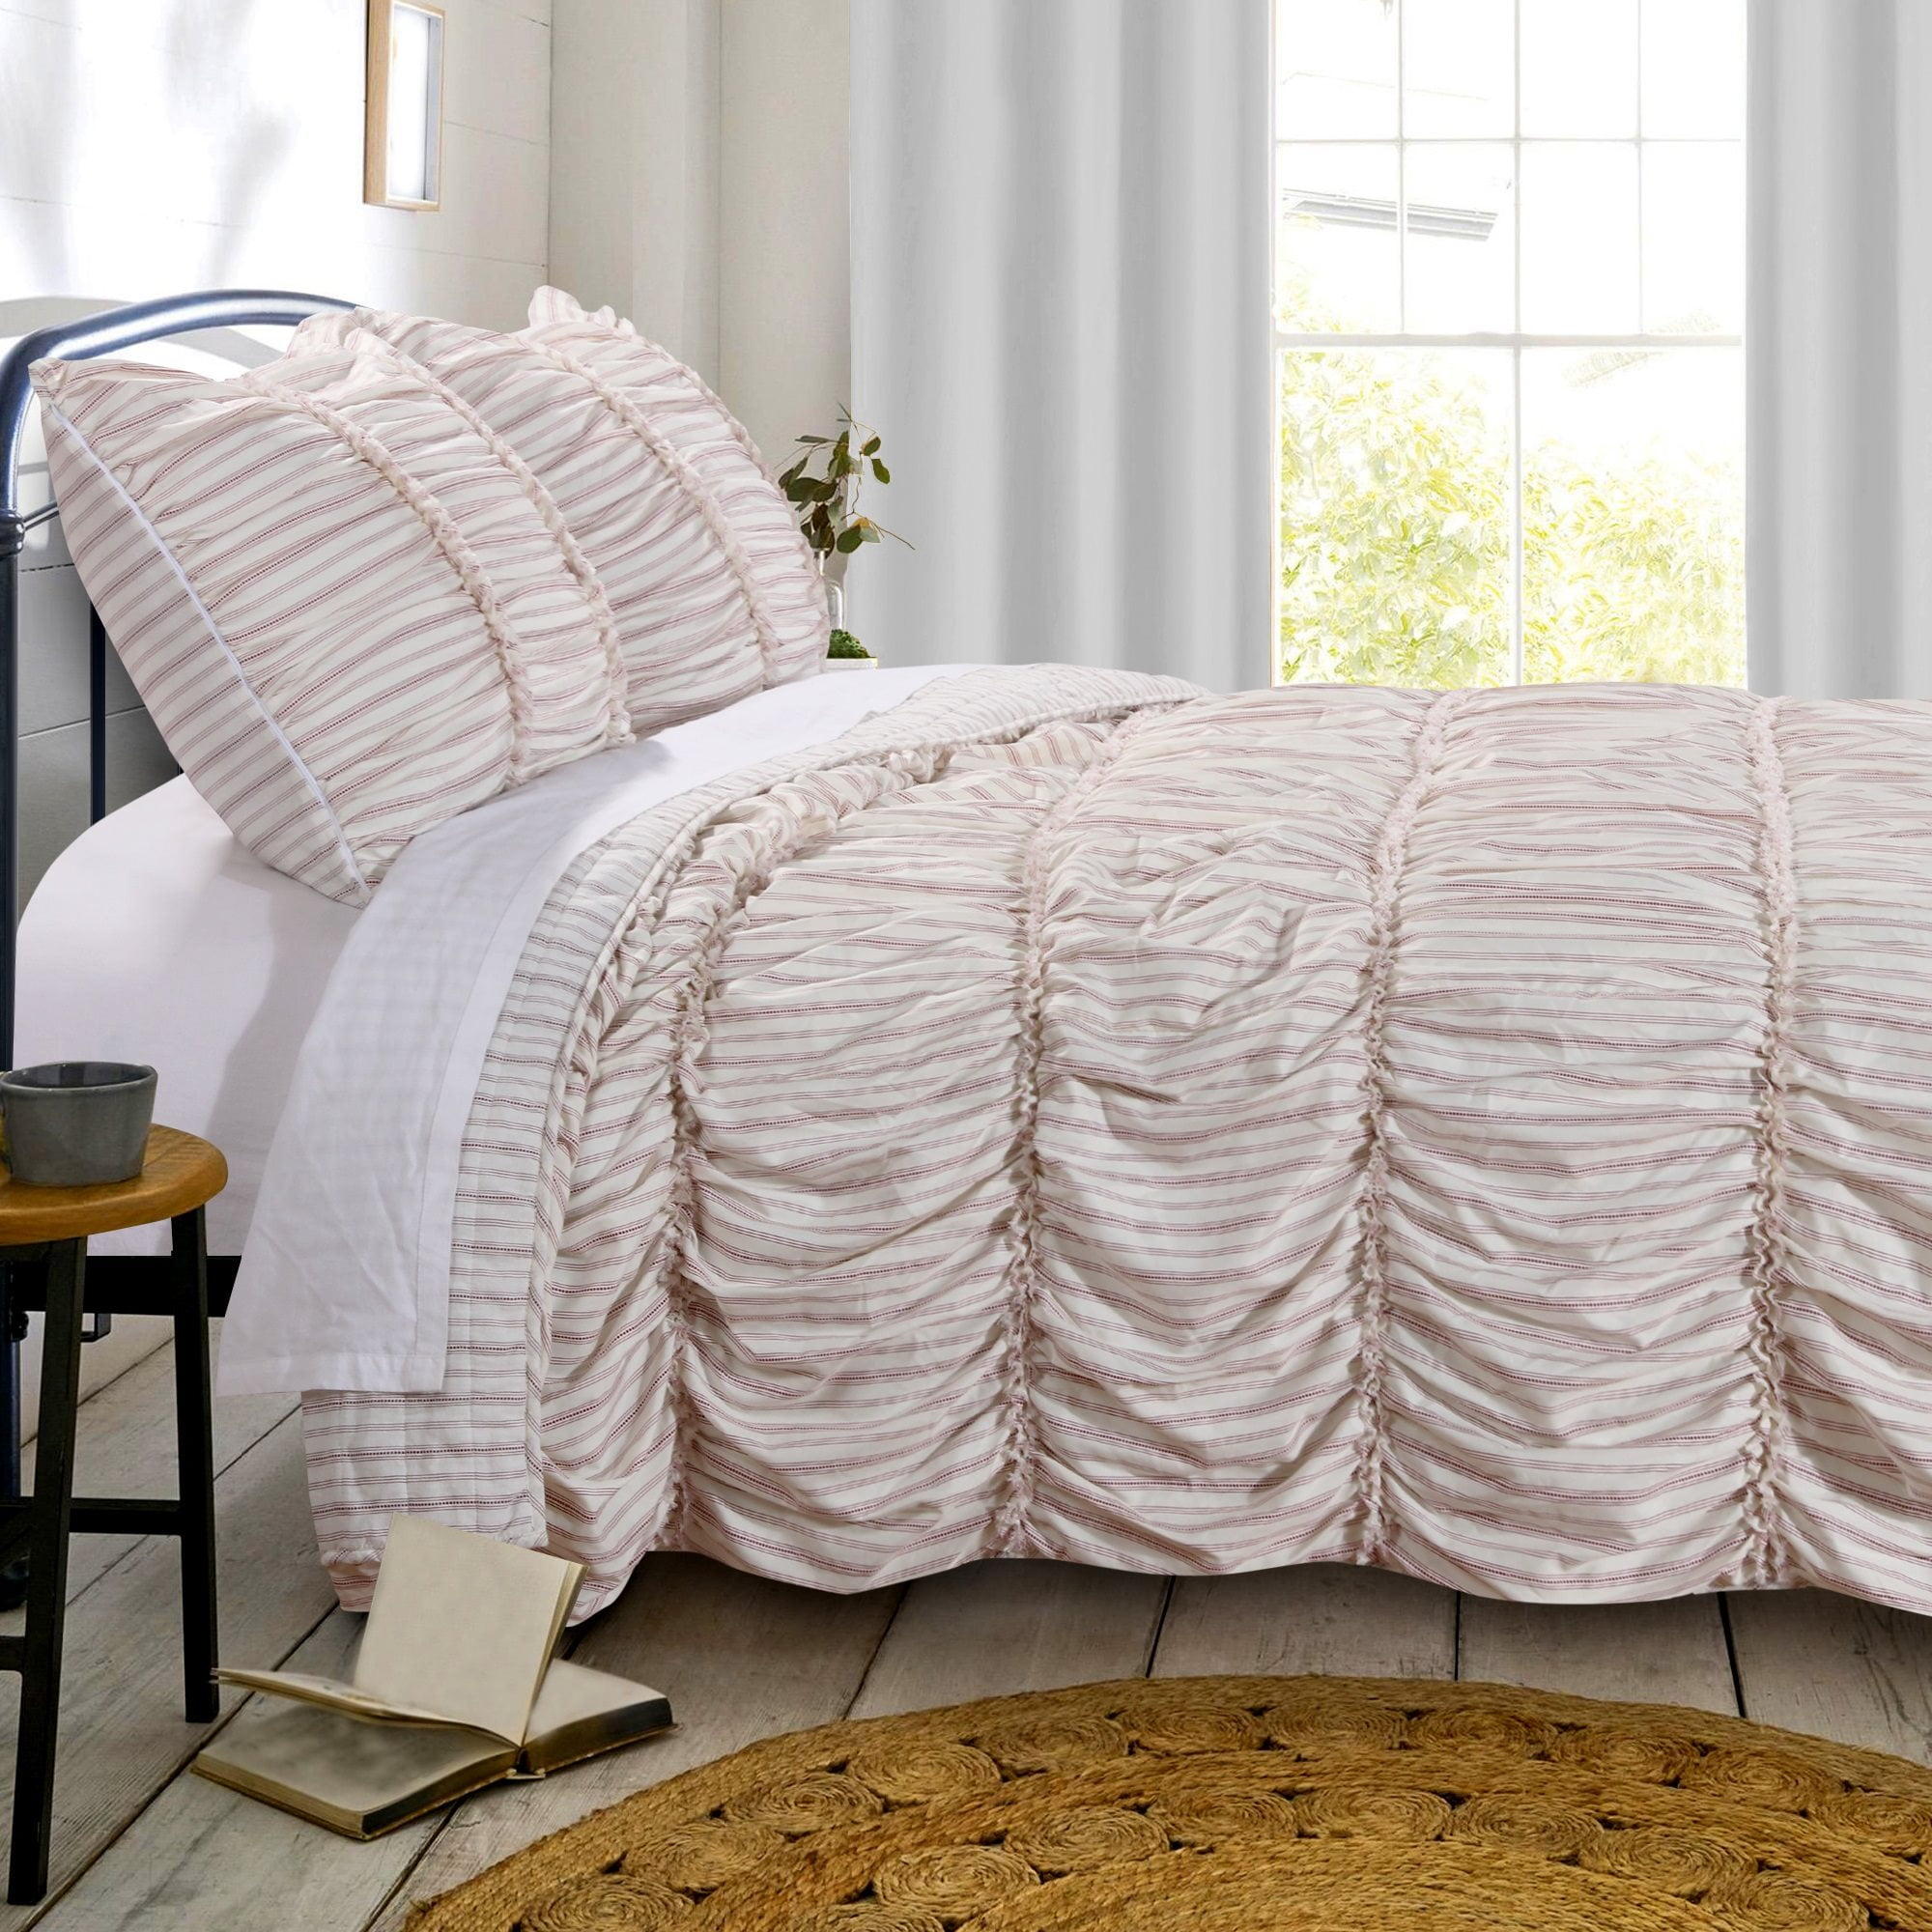 Details about   VHC Brands Farmhouse Twin Ticking Stripe Bed Skirt White Gathered Bedroom Decor 